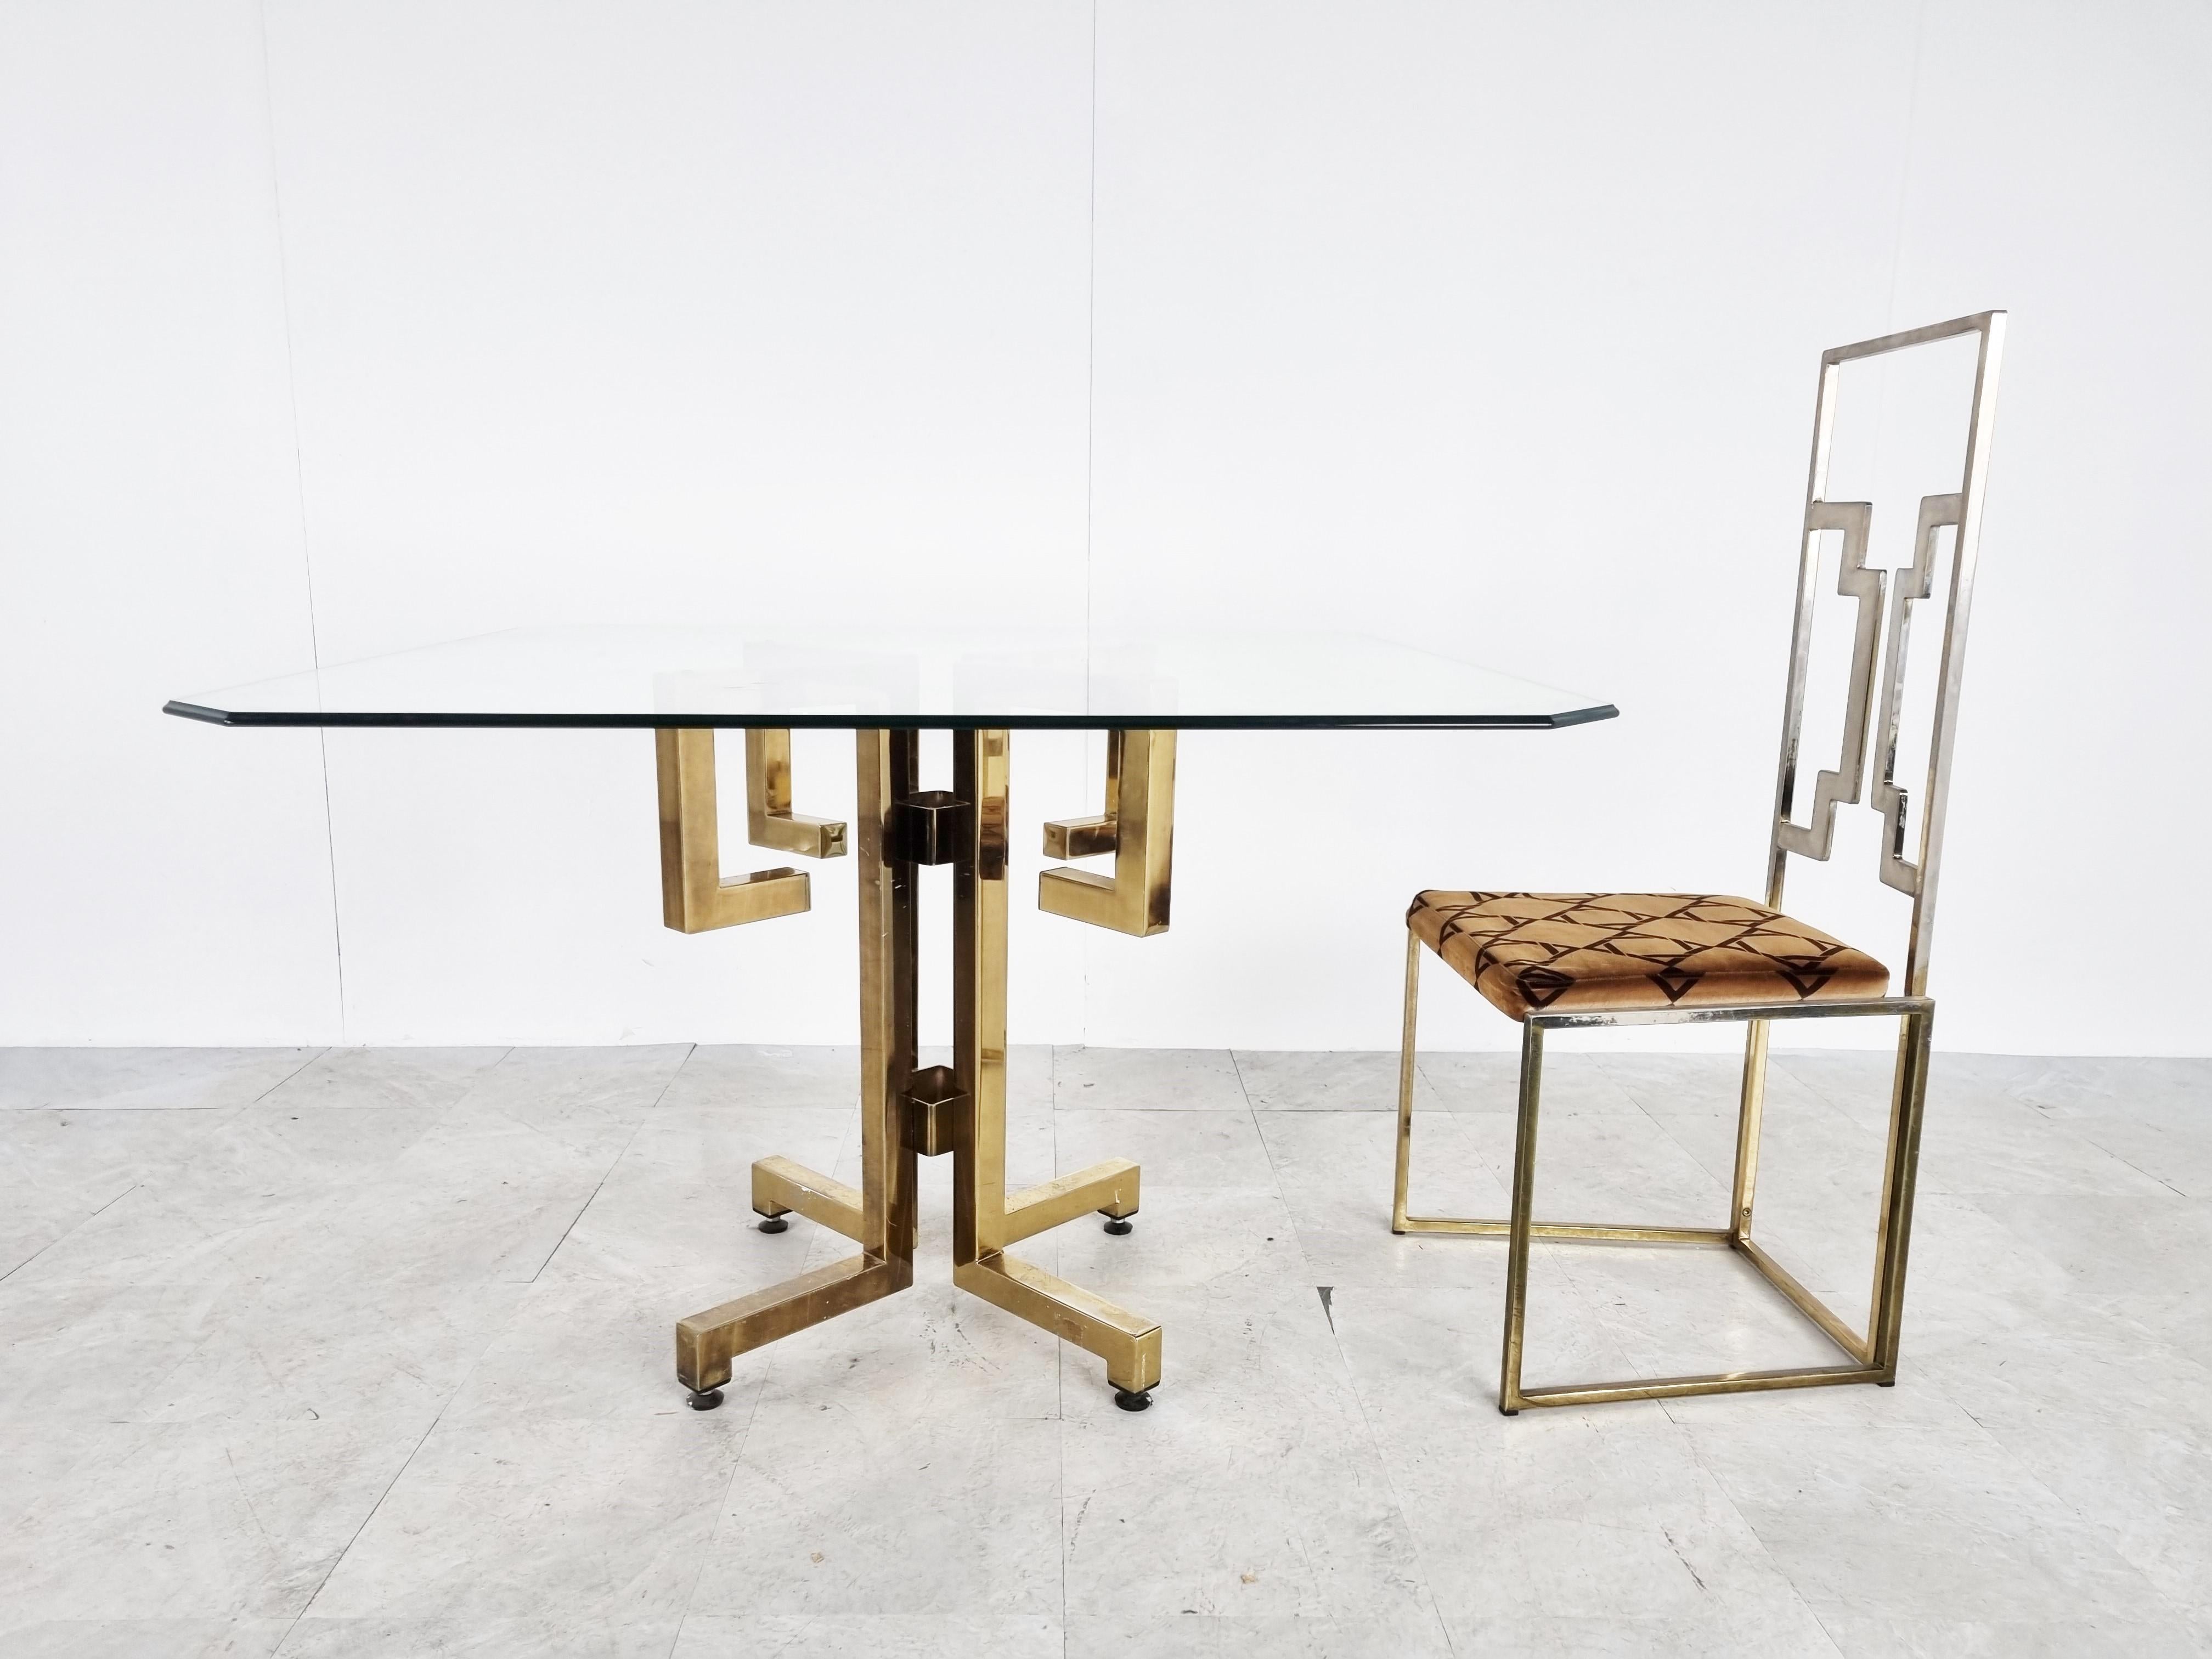 Striking geometrical brass dining table witha clear beveled glass top.

Glass can be changed uppon request.

1970s - Belgium

Good condition

Measures: height: 72 cm / 28.34